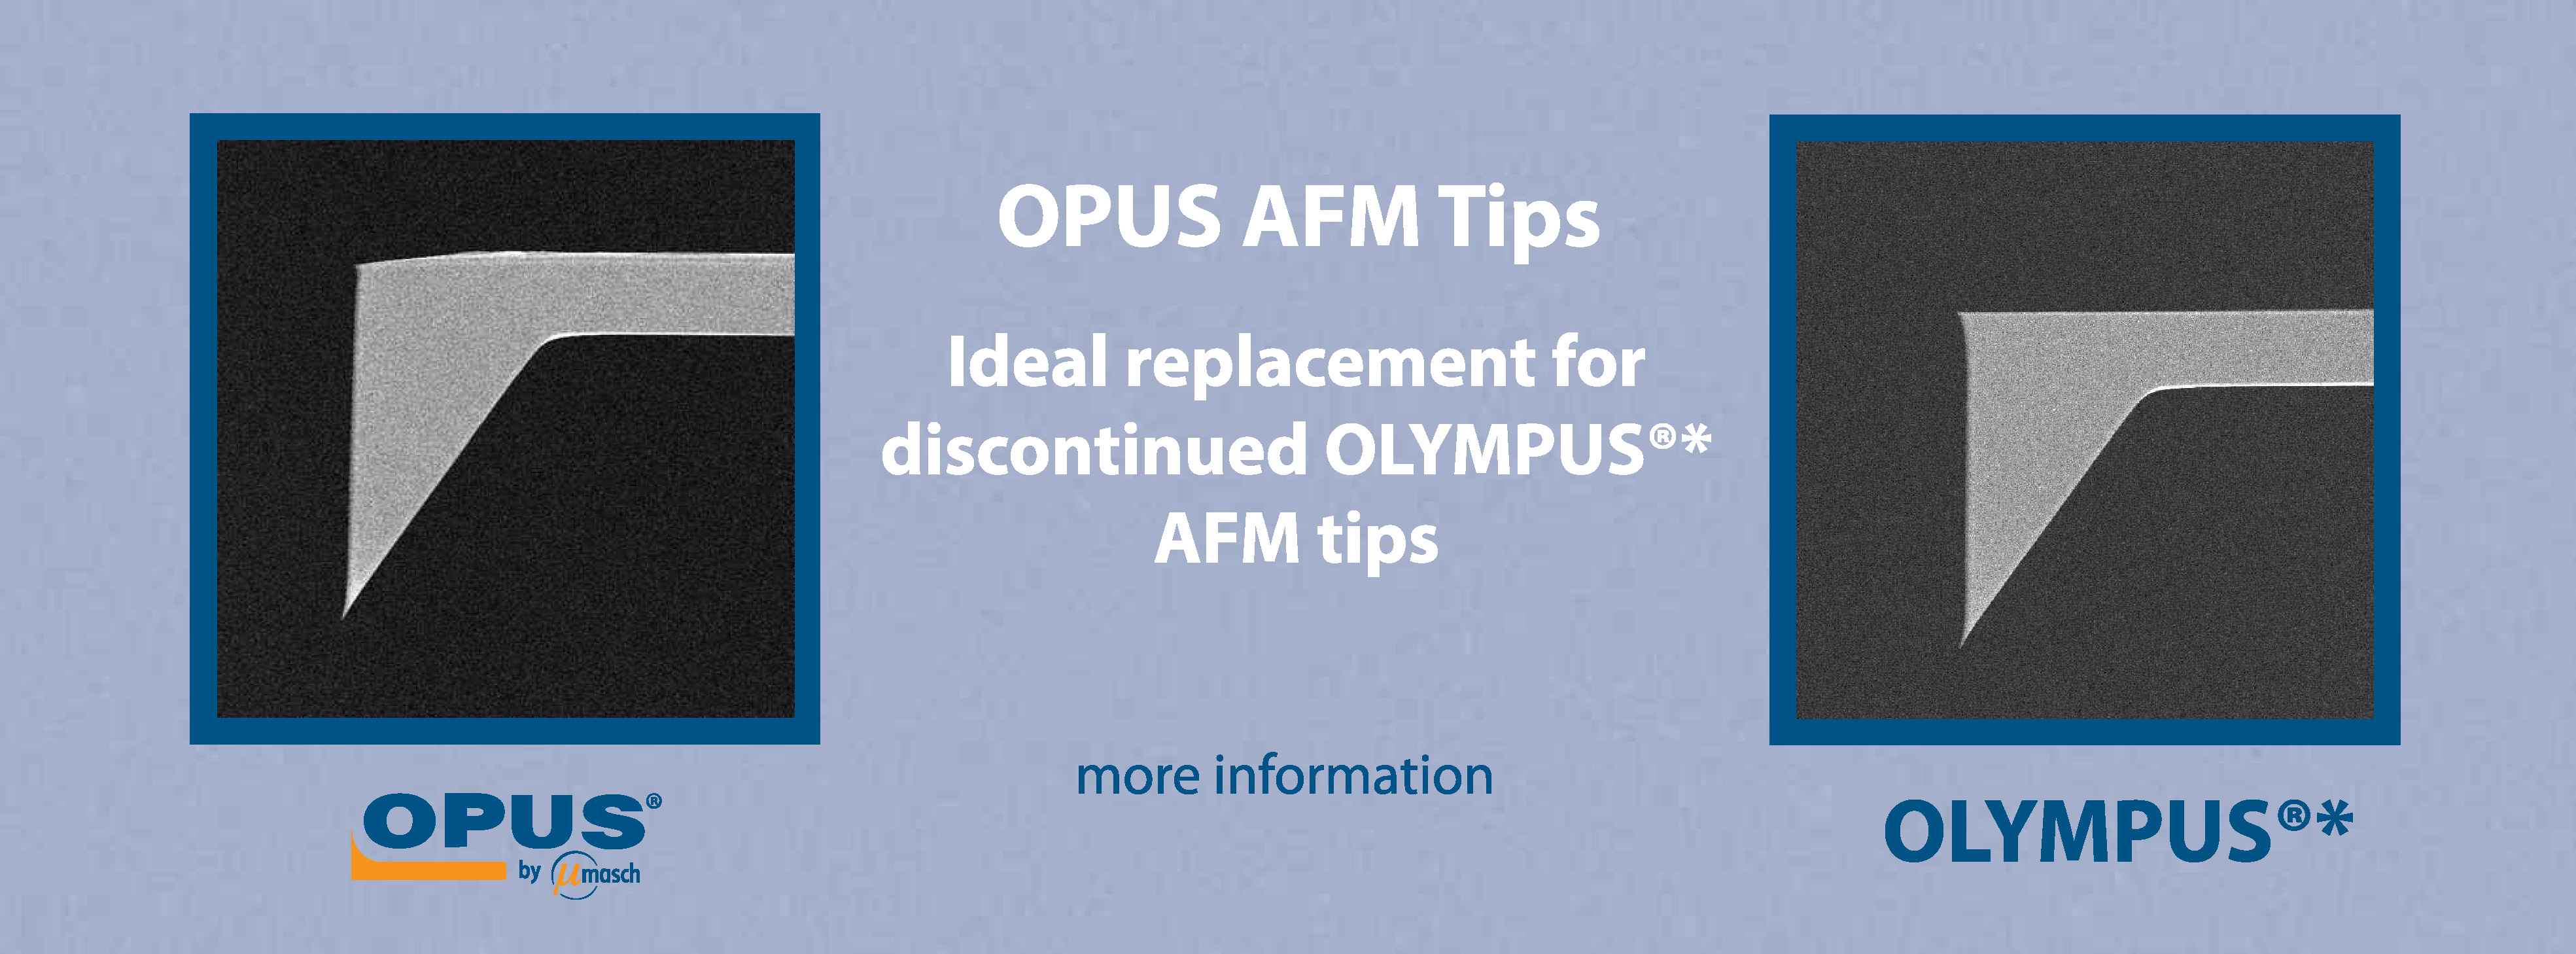 OPUS AFM tips are identical to Olympus®* AFM tips in form, fit and function.